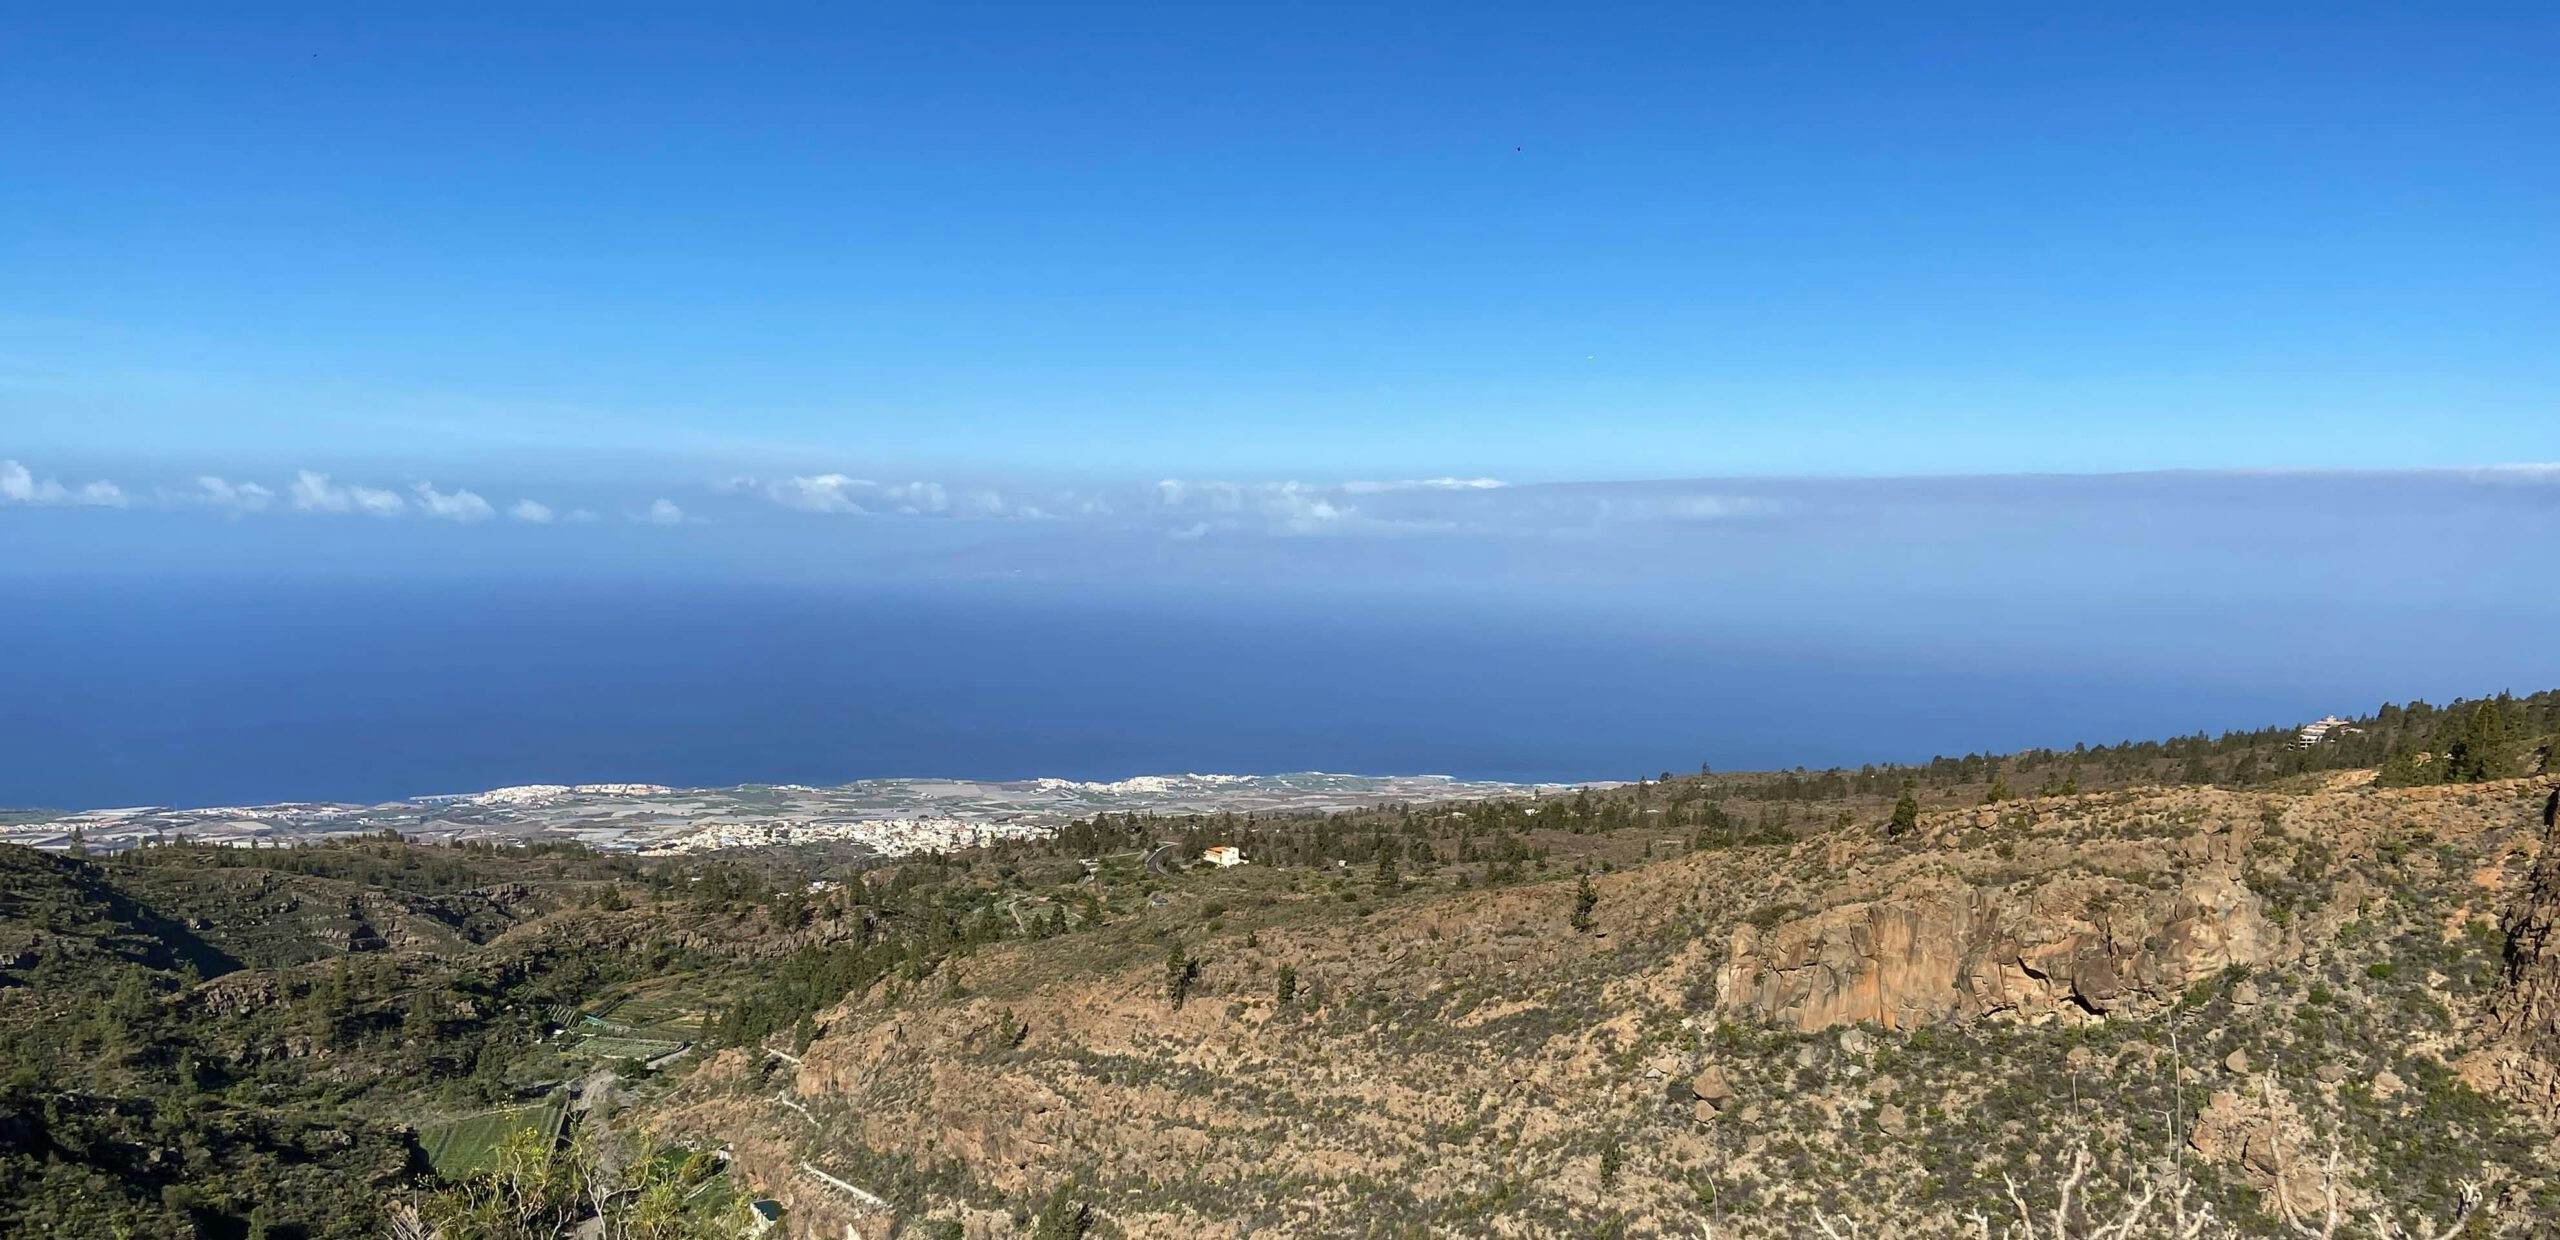 View of the coast and the neighbouring islands of Tenerife from the hiking trail